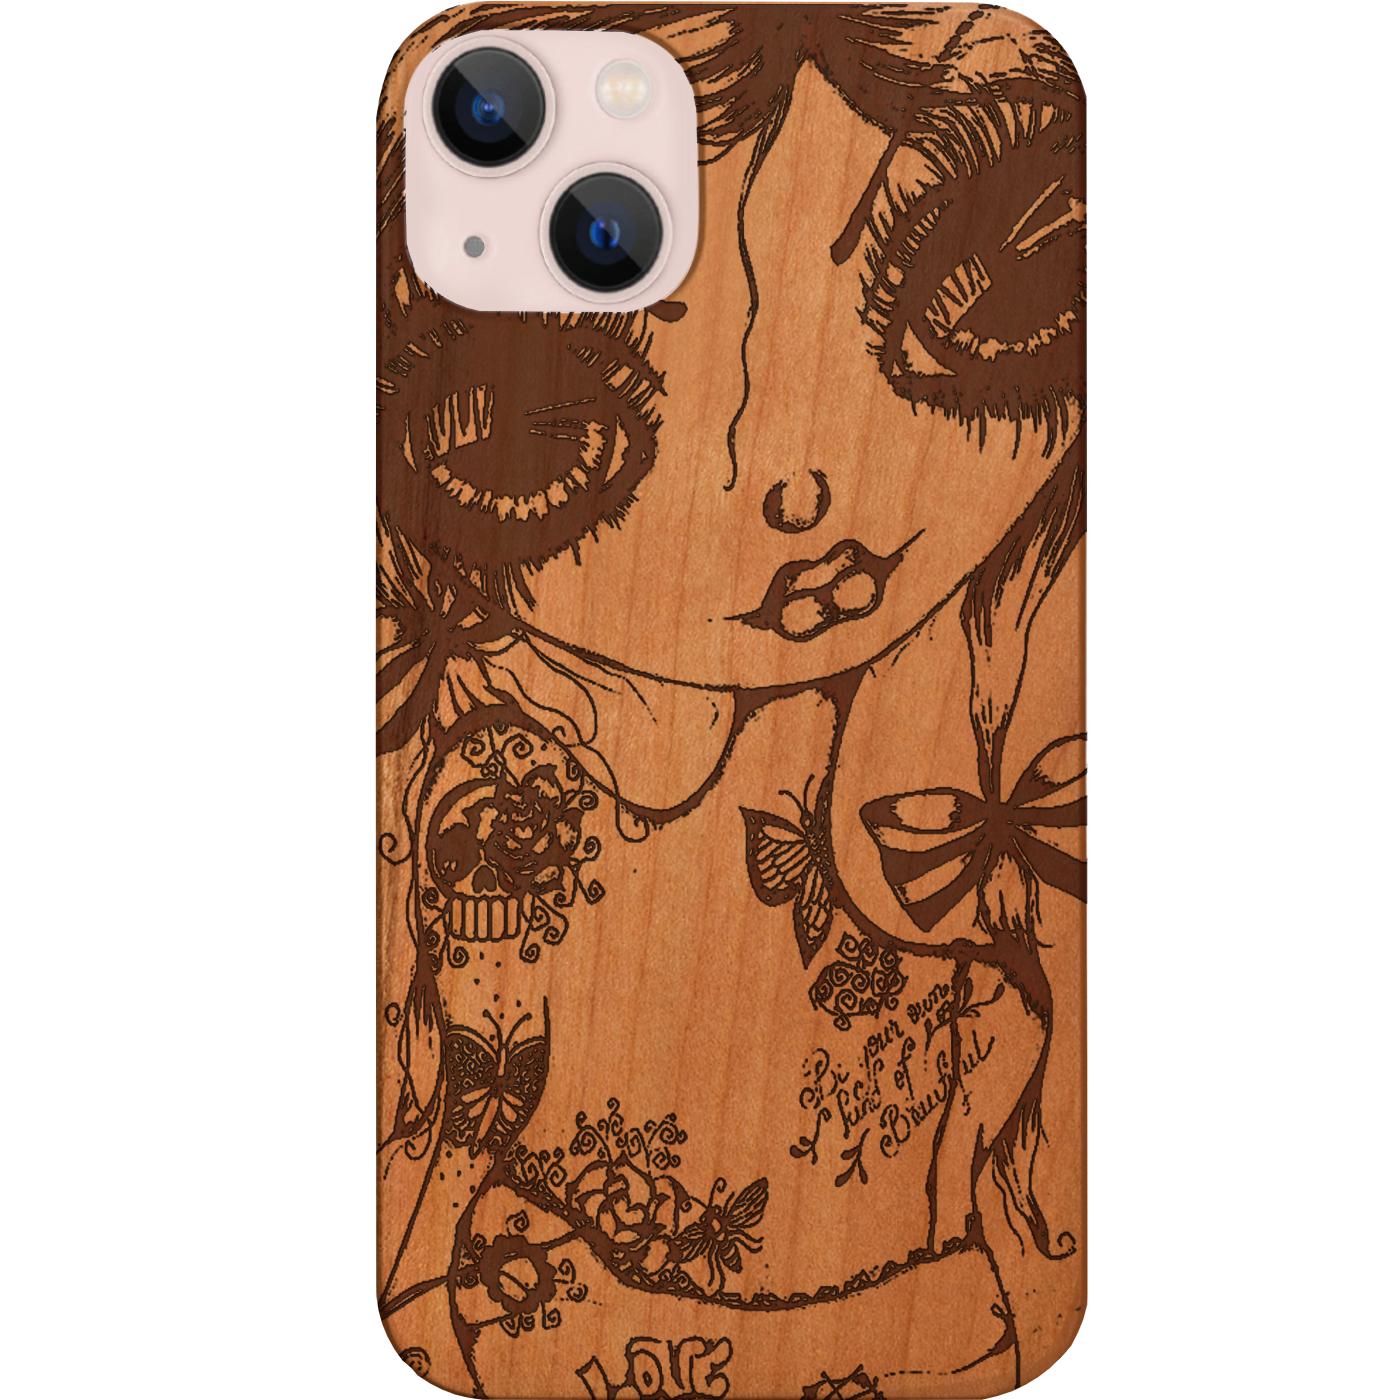 Tattoo Free / I Guess I'm Just A Rebel - buy stylish phone case designed by  InspiredImages on ArtWOW